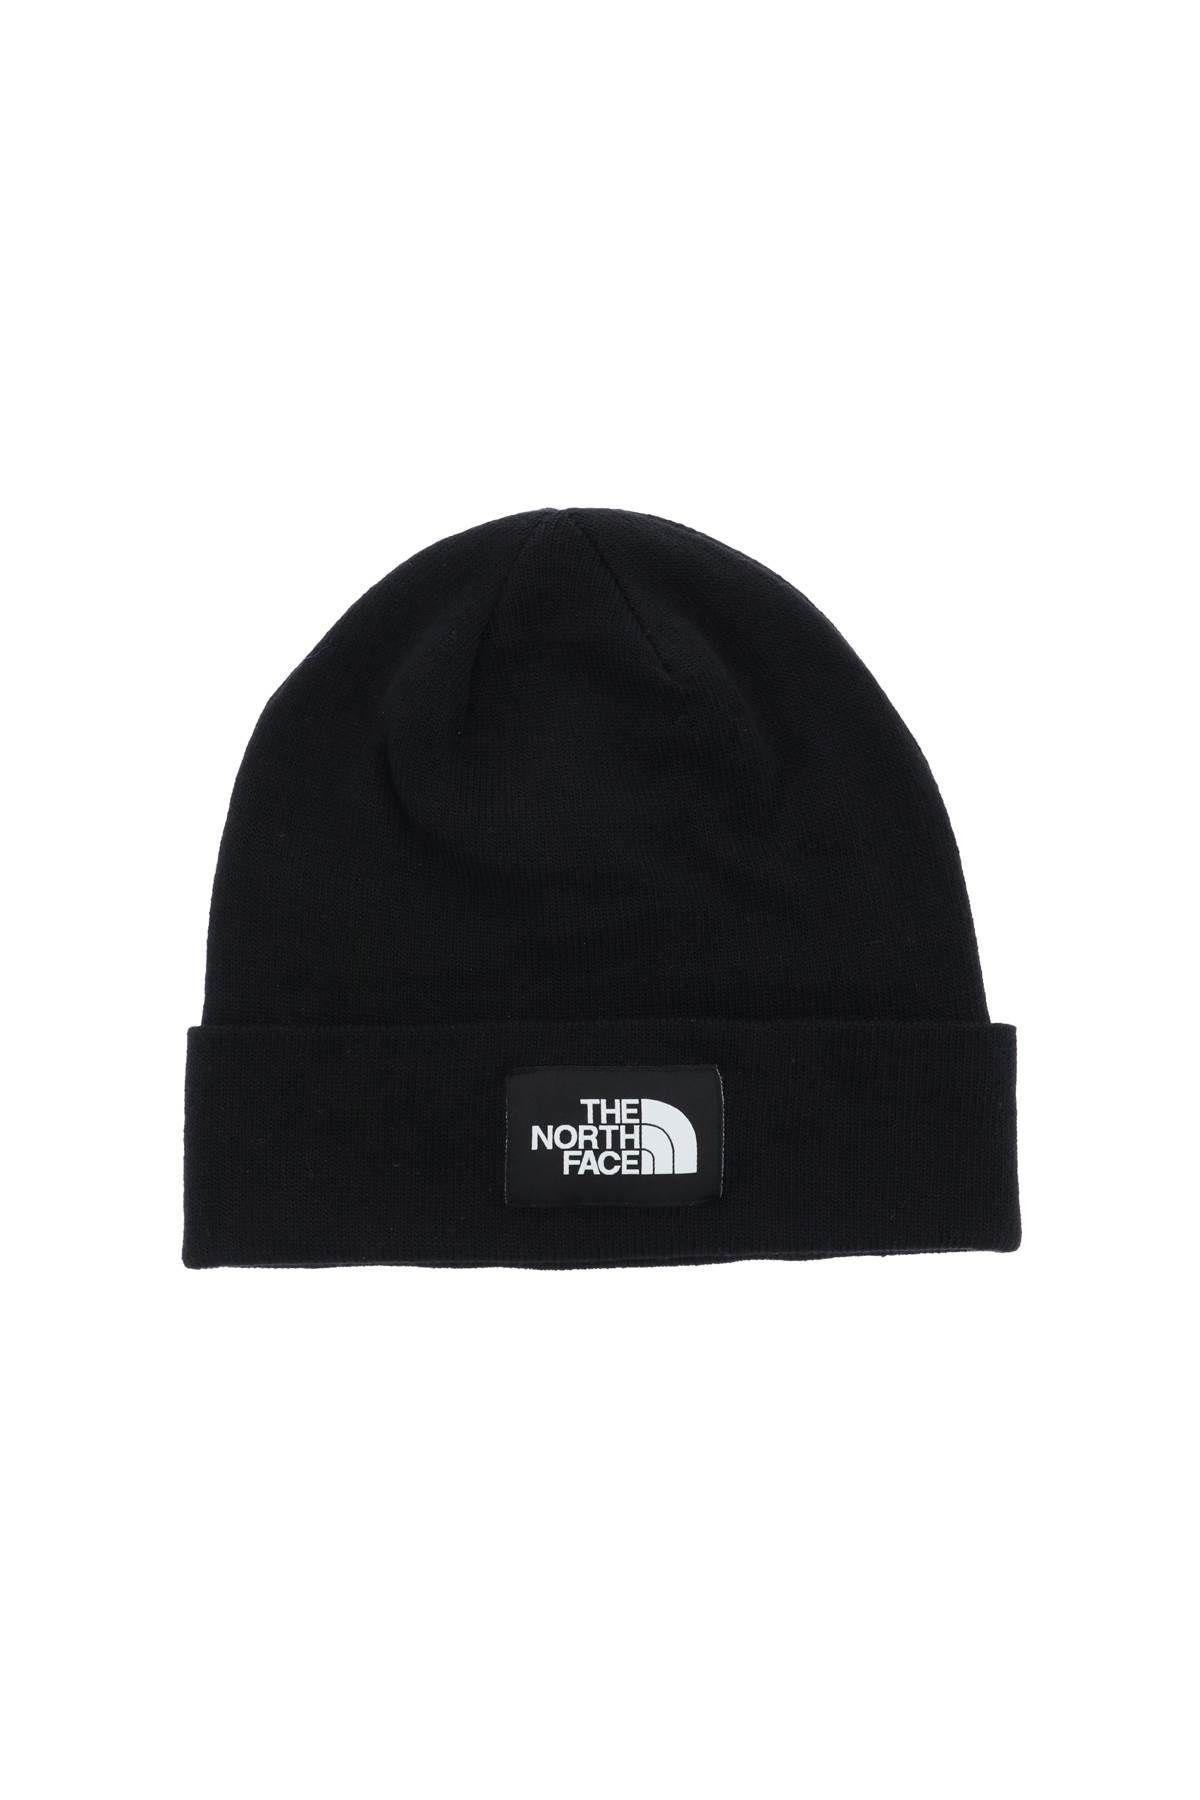 Dock Worker beanie hat The North Face - 1